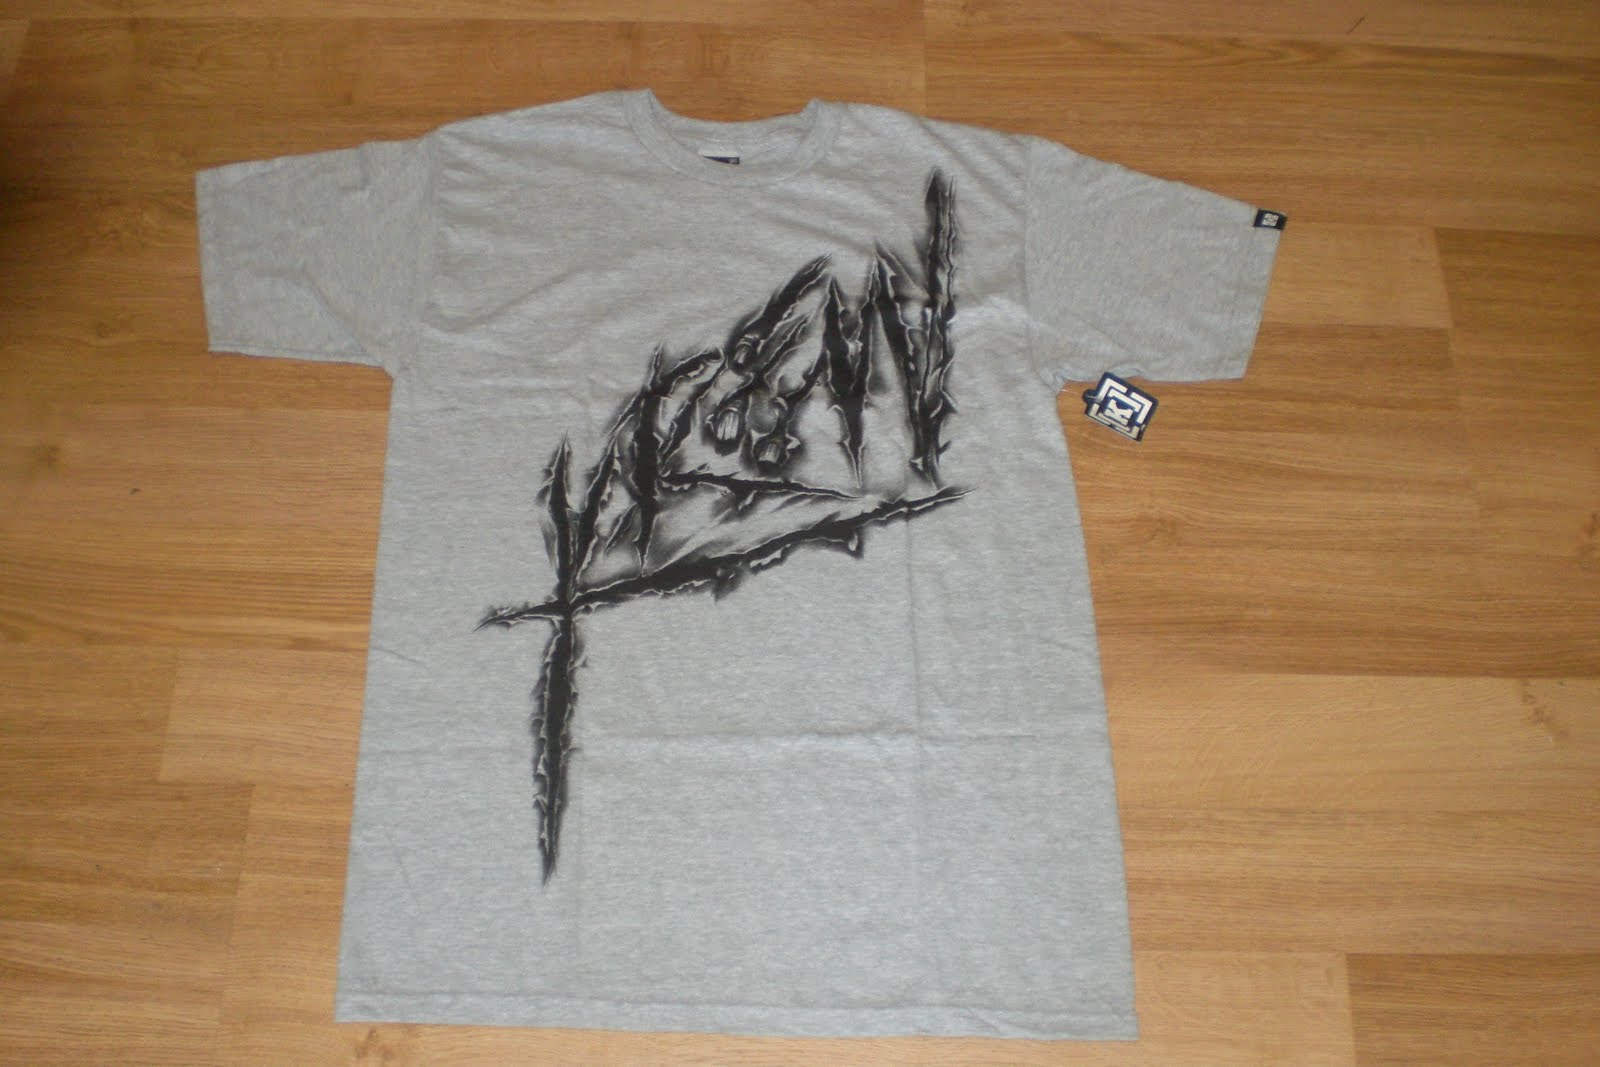 FLAT SPOT SKATE SHOP: KREW CLOTHING JUST IN................